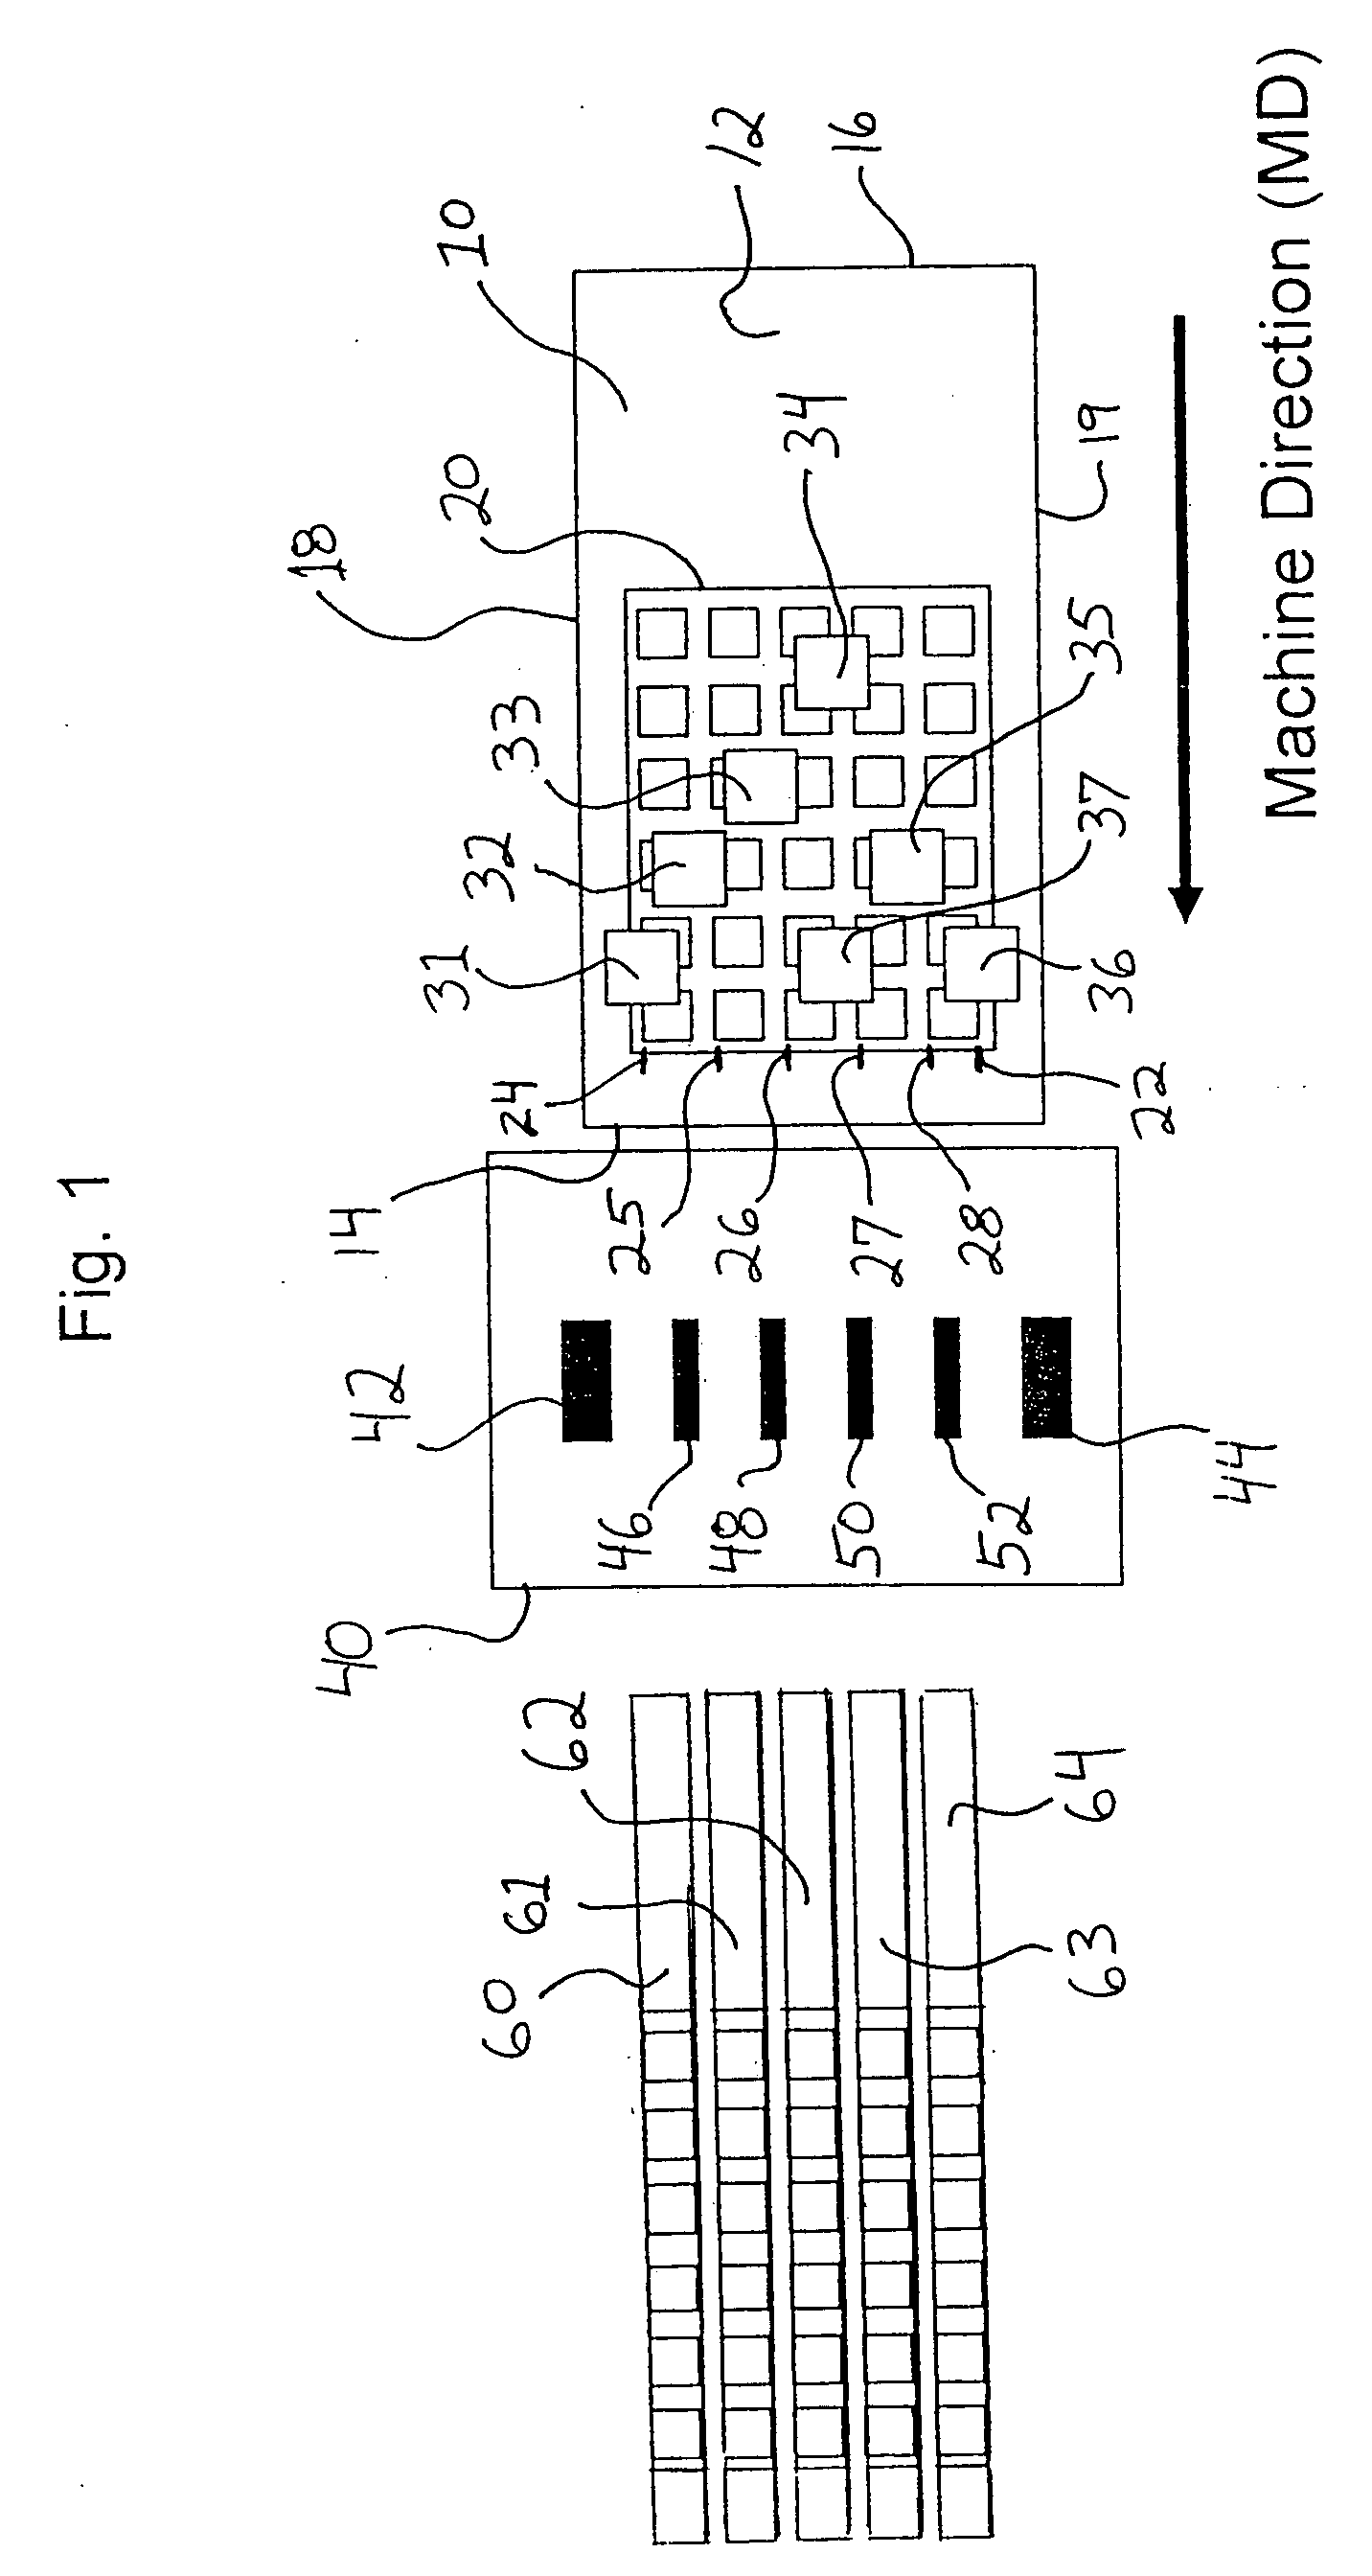 Process and system for sub-dividing a laminated flooring substrate